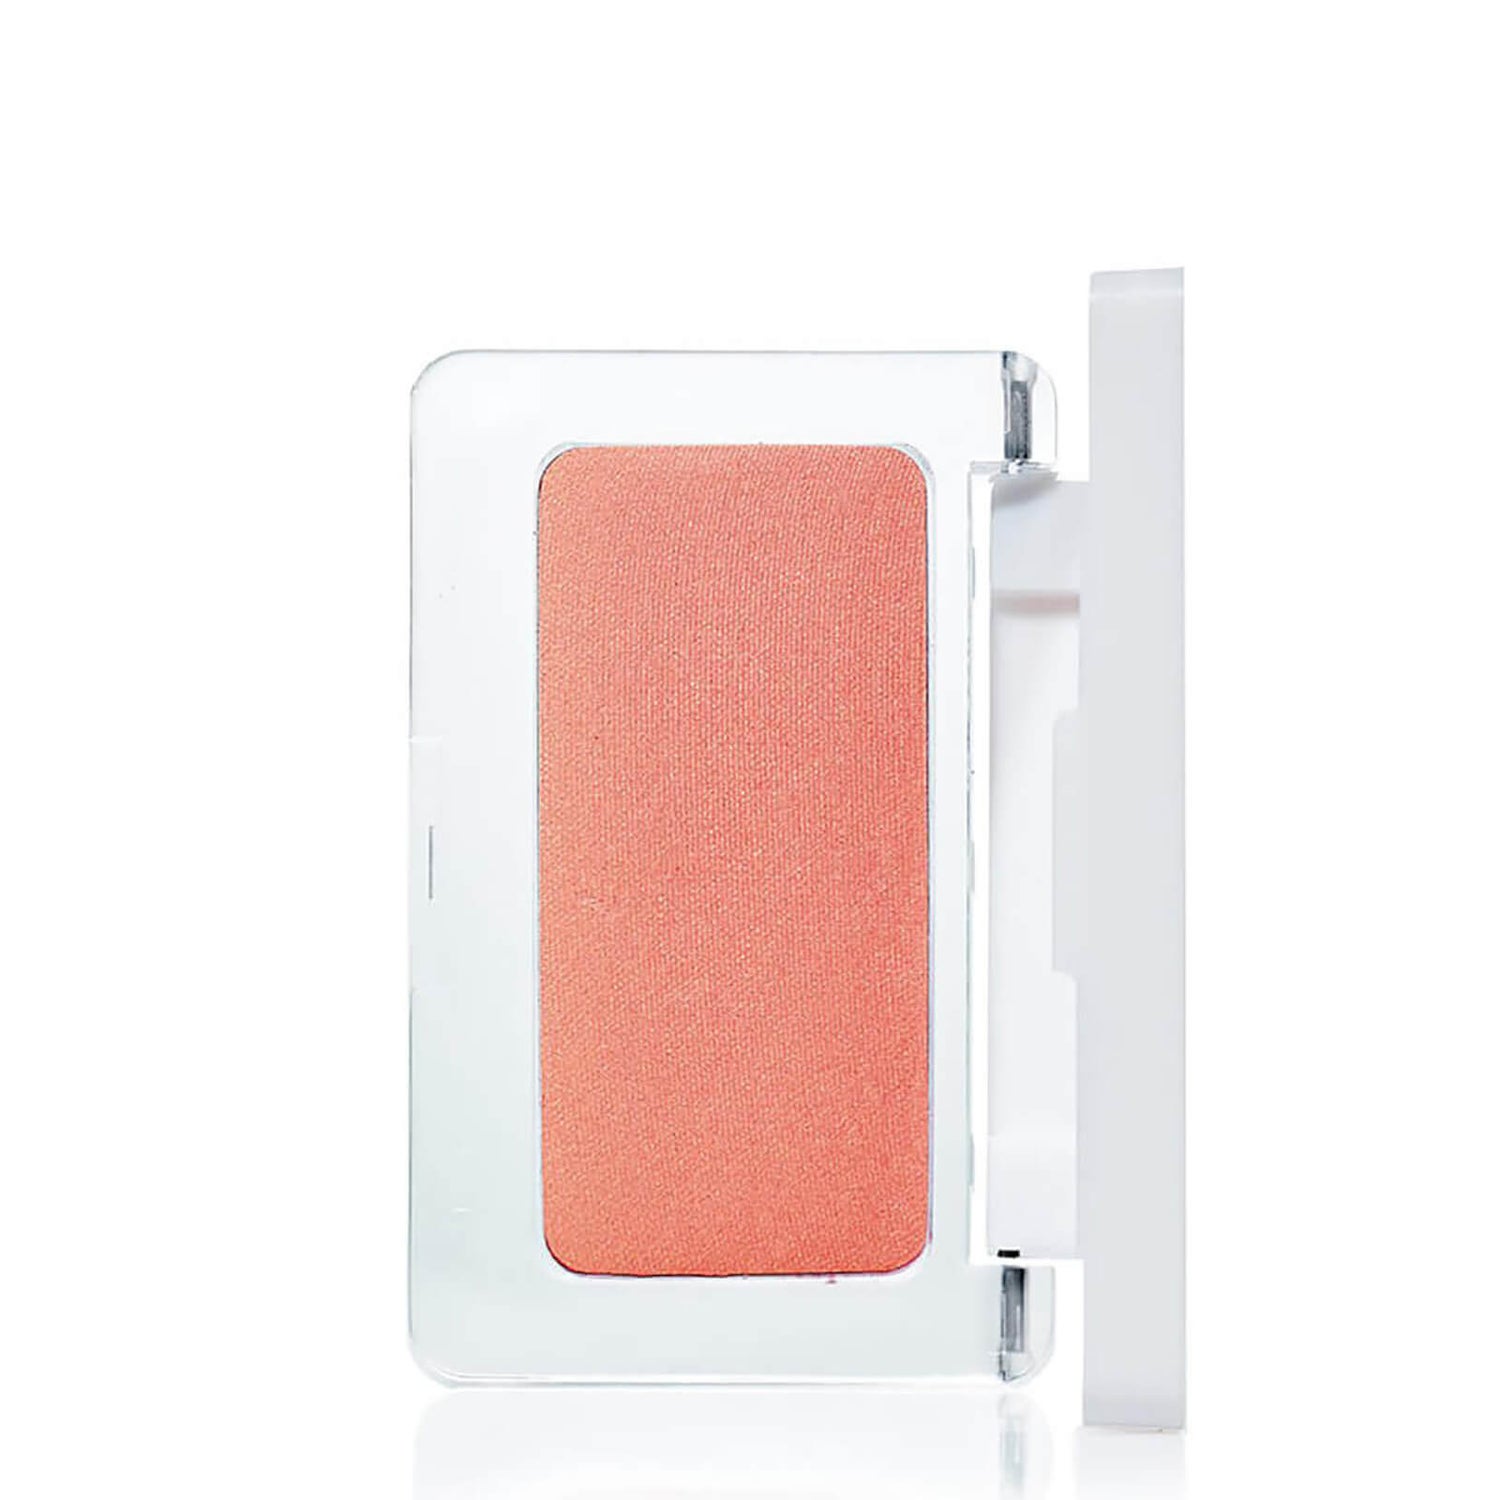 RMS Beauty Pressed Blush - Lost Angel (0.17 oz.)